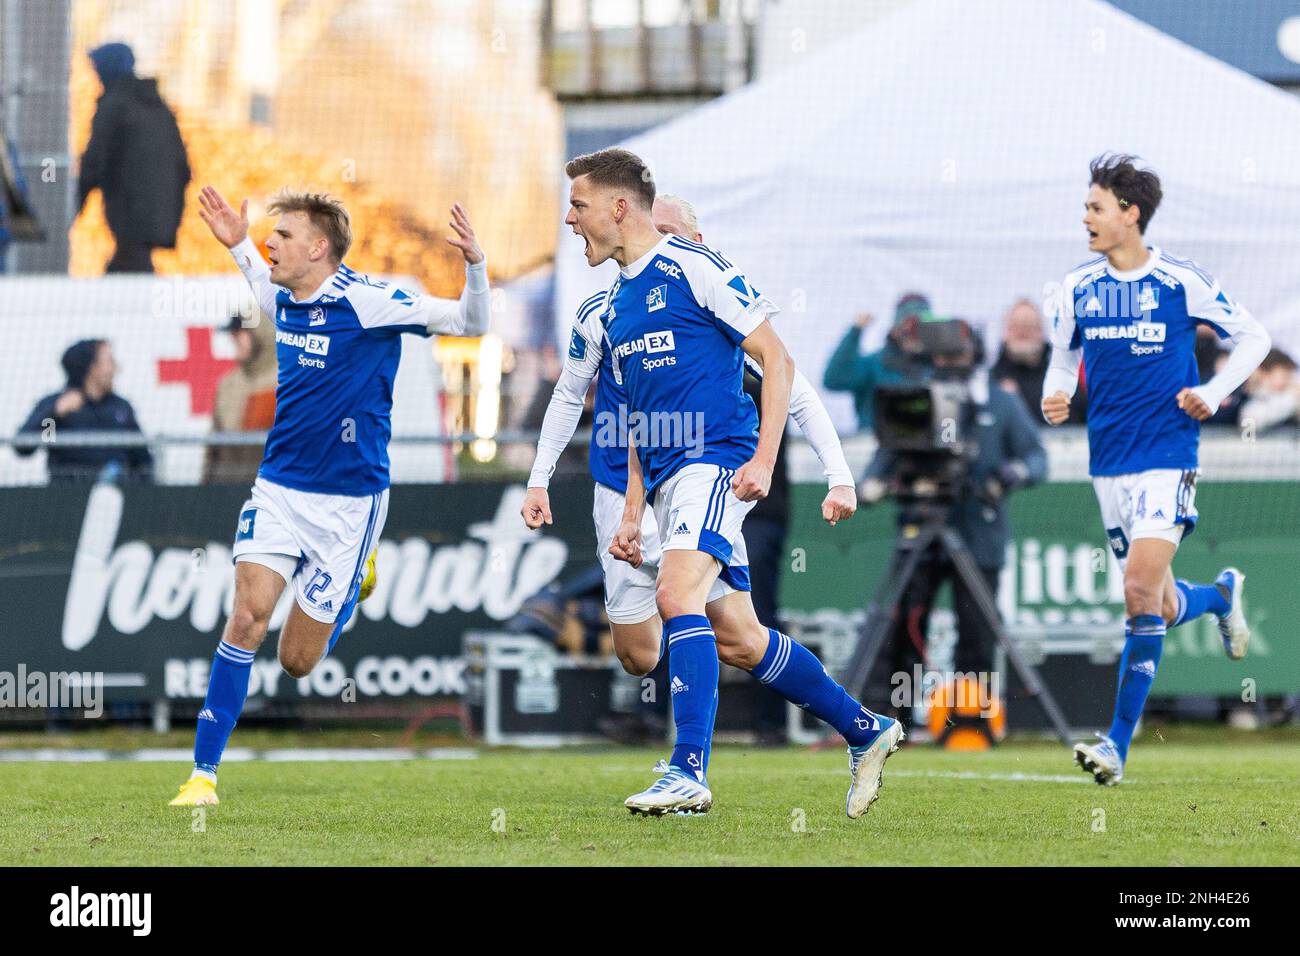 Lyngby, Denmark. 19th, February 2023. Alfred Finnbogason (18) of Lyngby Boldklub equalises for 1-1 during the Danish 3F Superliga match between Lyngby Boldklub and FC Nordsjaelland at Lyngby Stadion in Lyngby. (Photo credit: Gonzales Photo - Dejan Obretkovic). Stock Photo